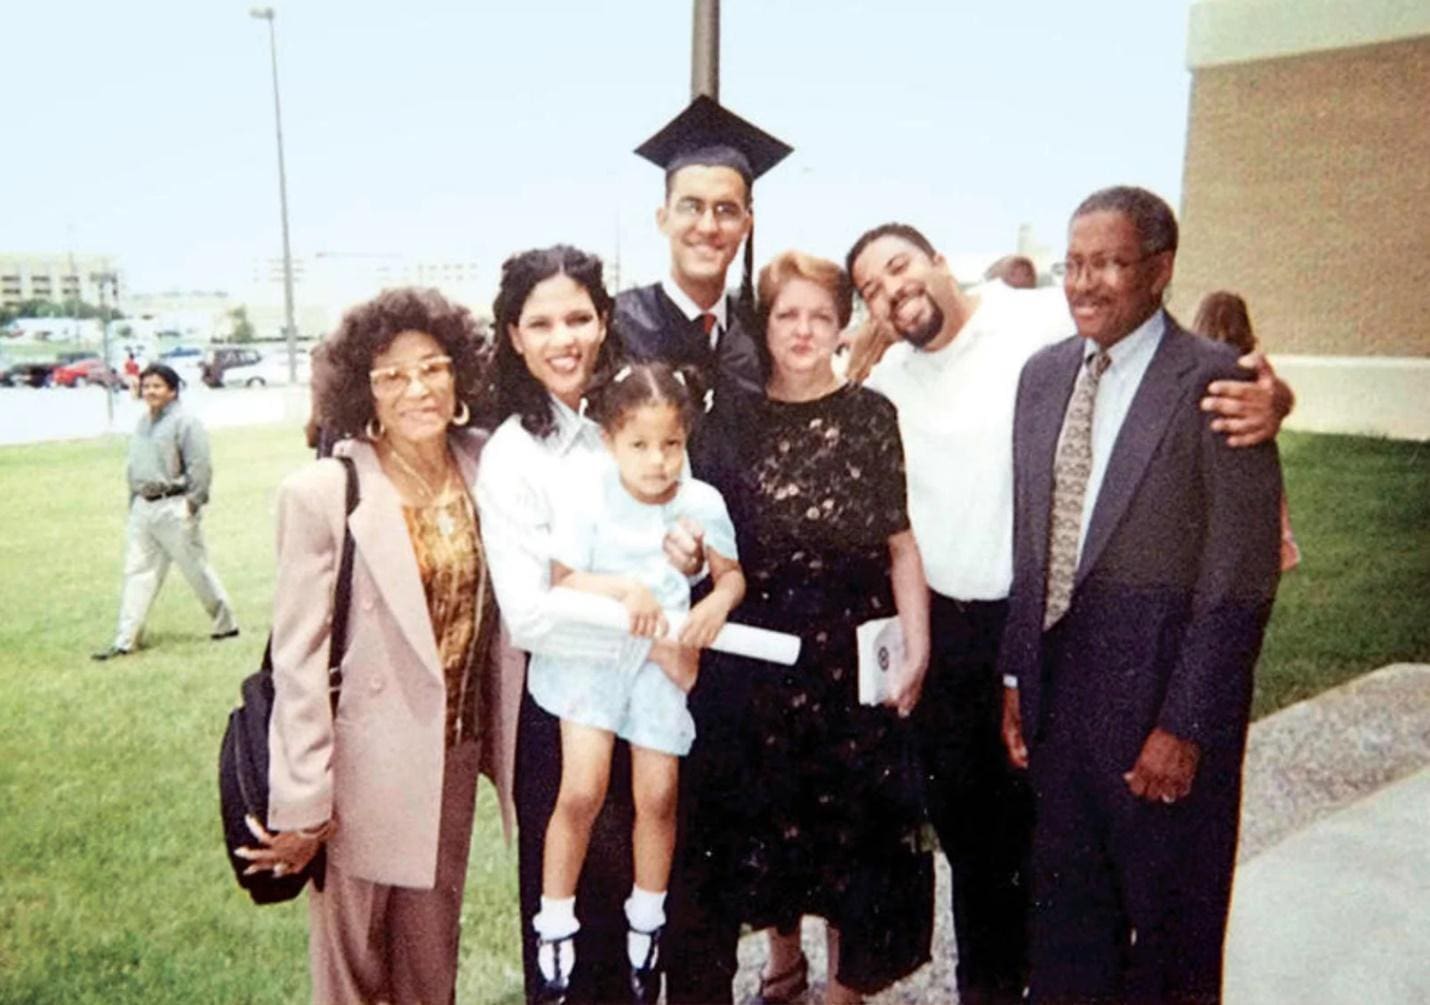 Photo: With my family at my graduation from Texas A&M University